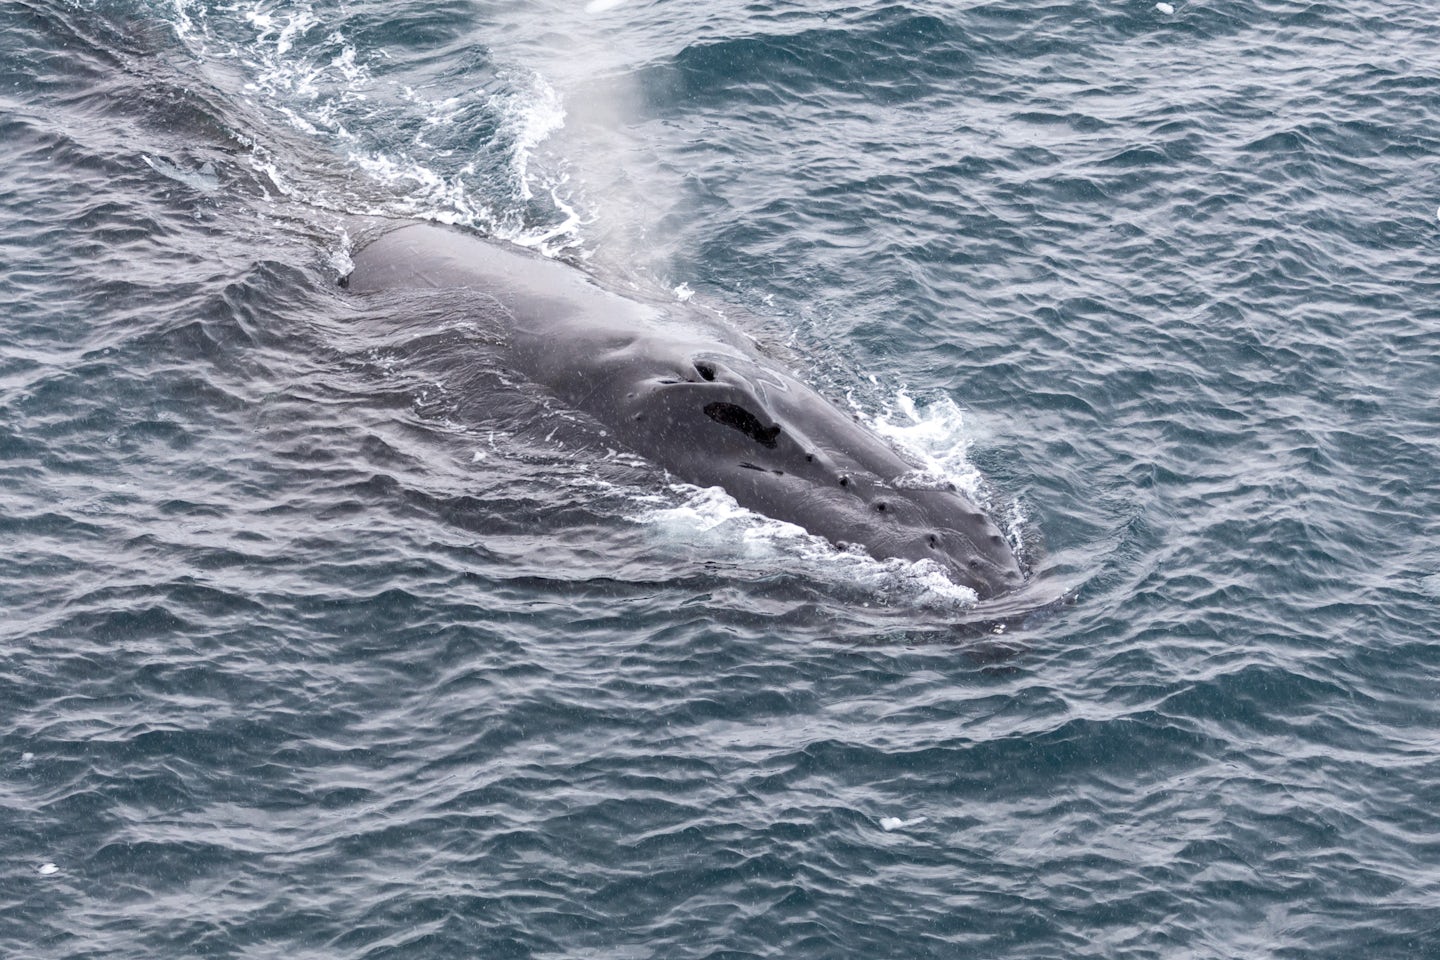 Photo of humpback whale taken from our balcony